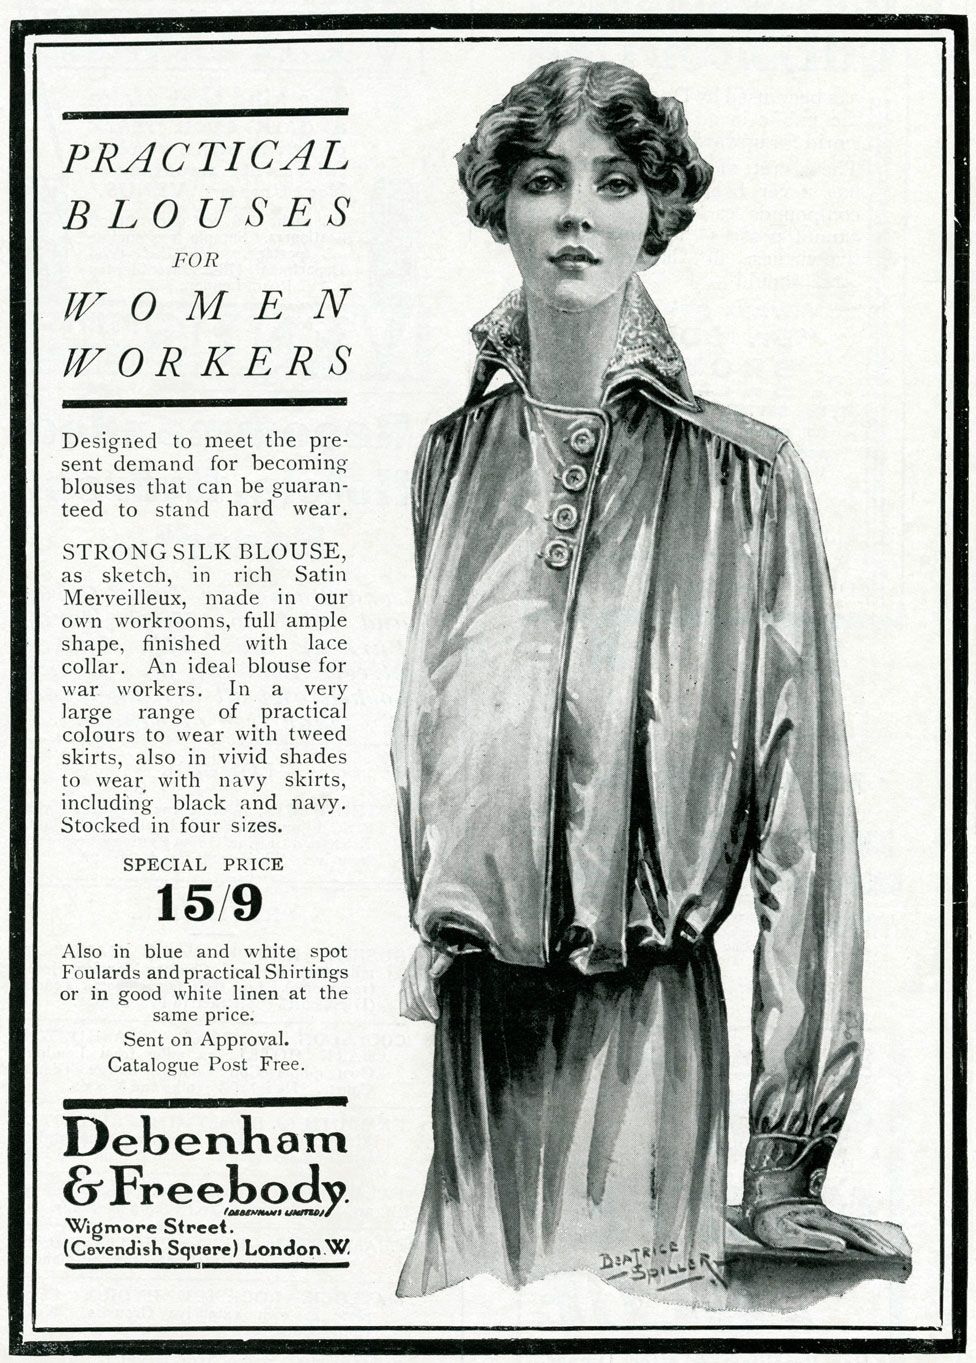 A newspaper advert for blouses